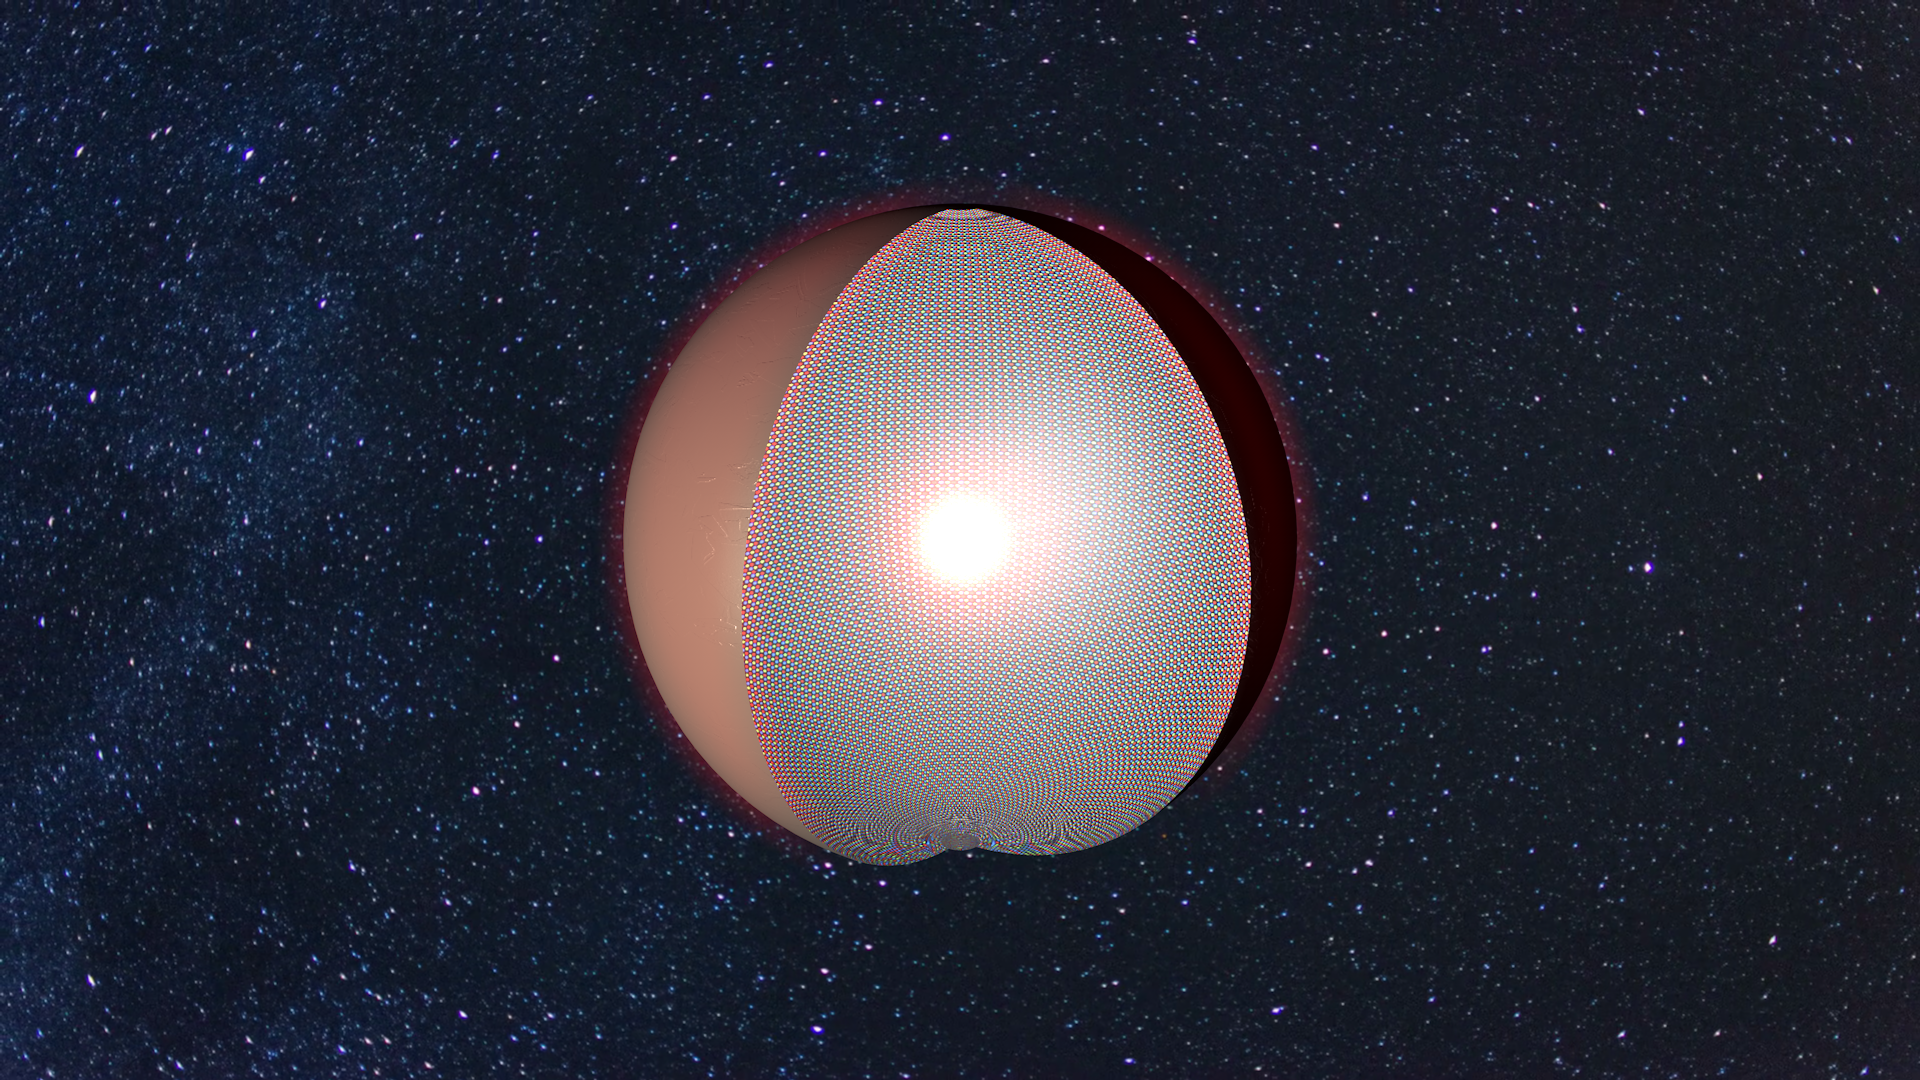 Illustration of a Dyson sphere